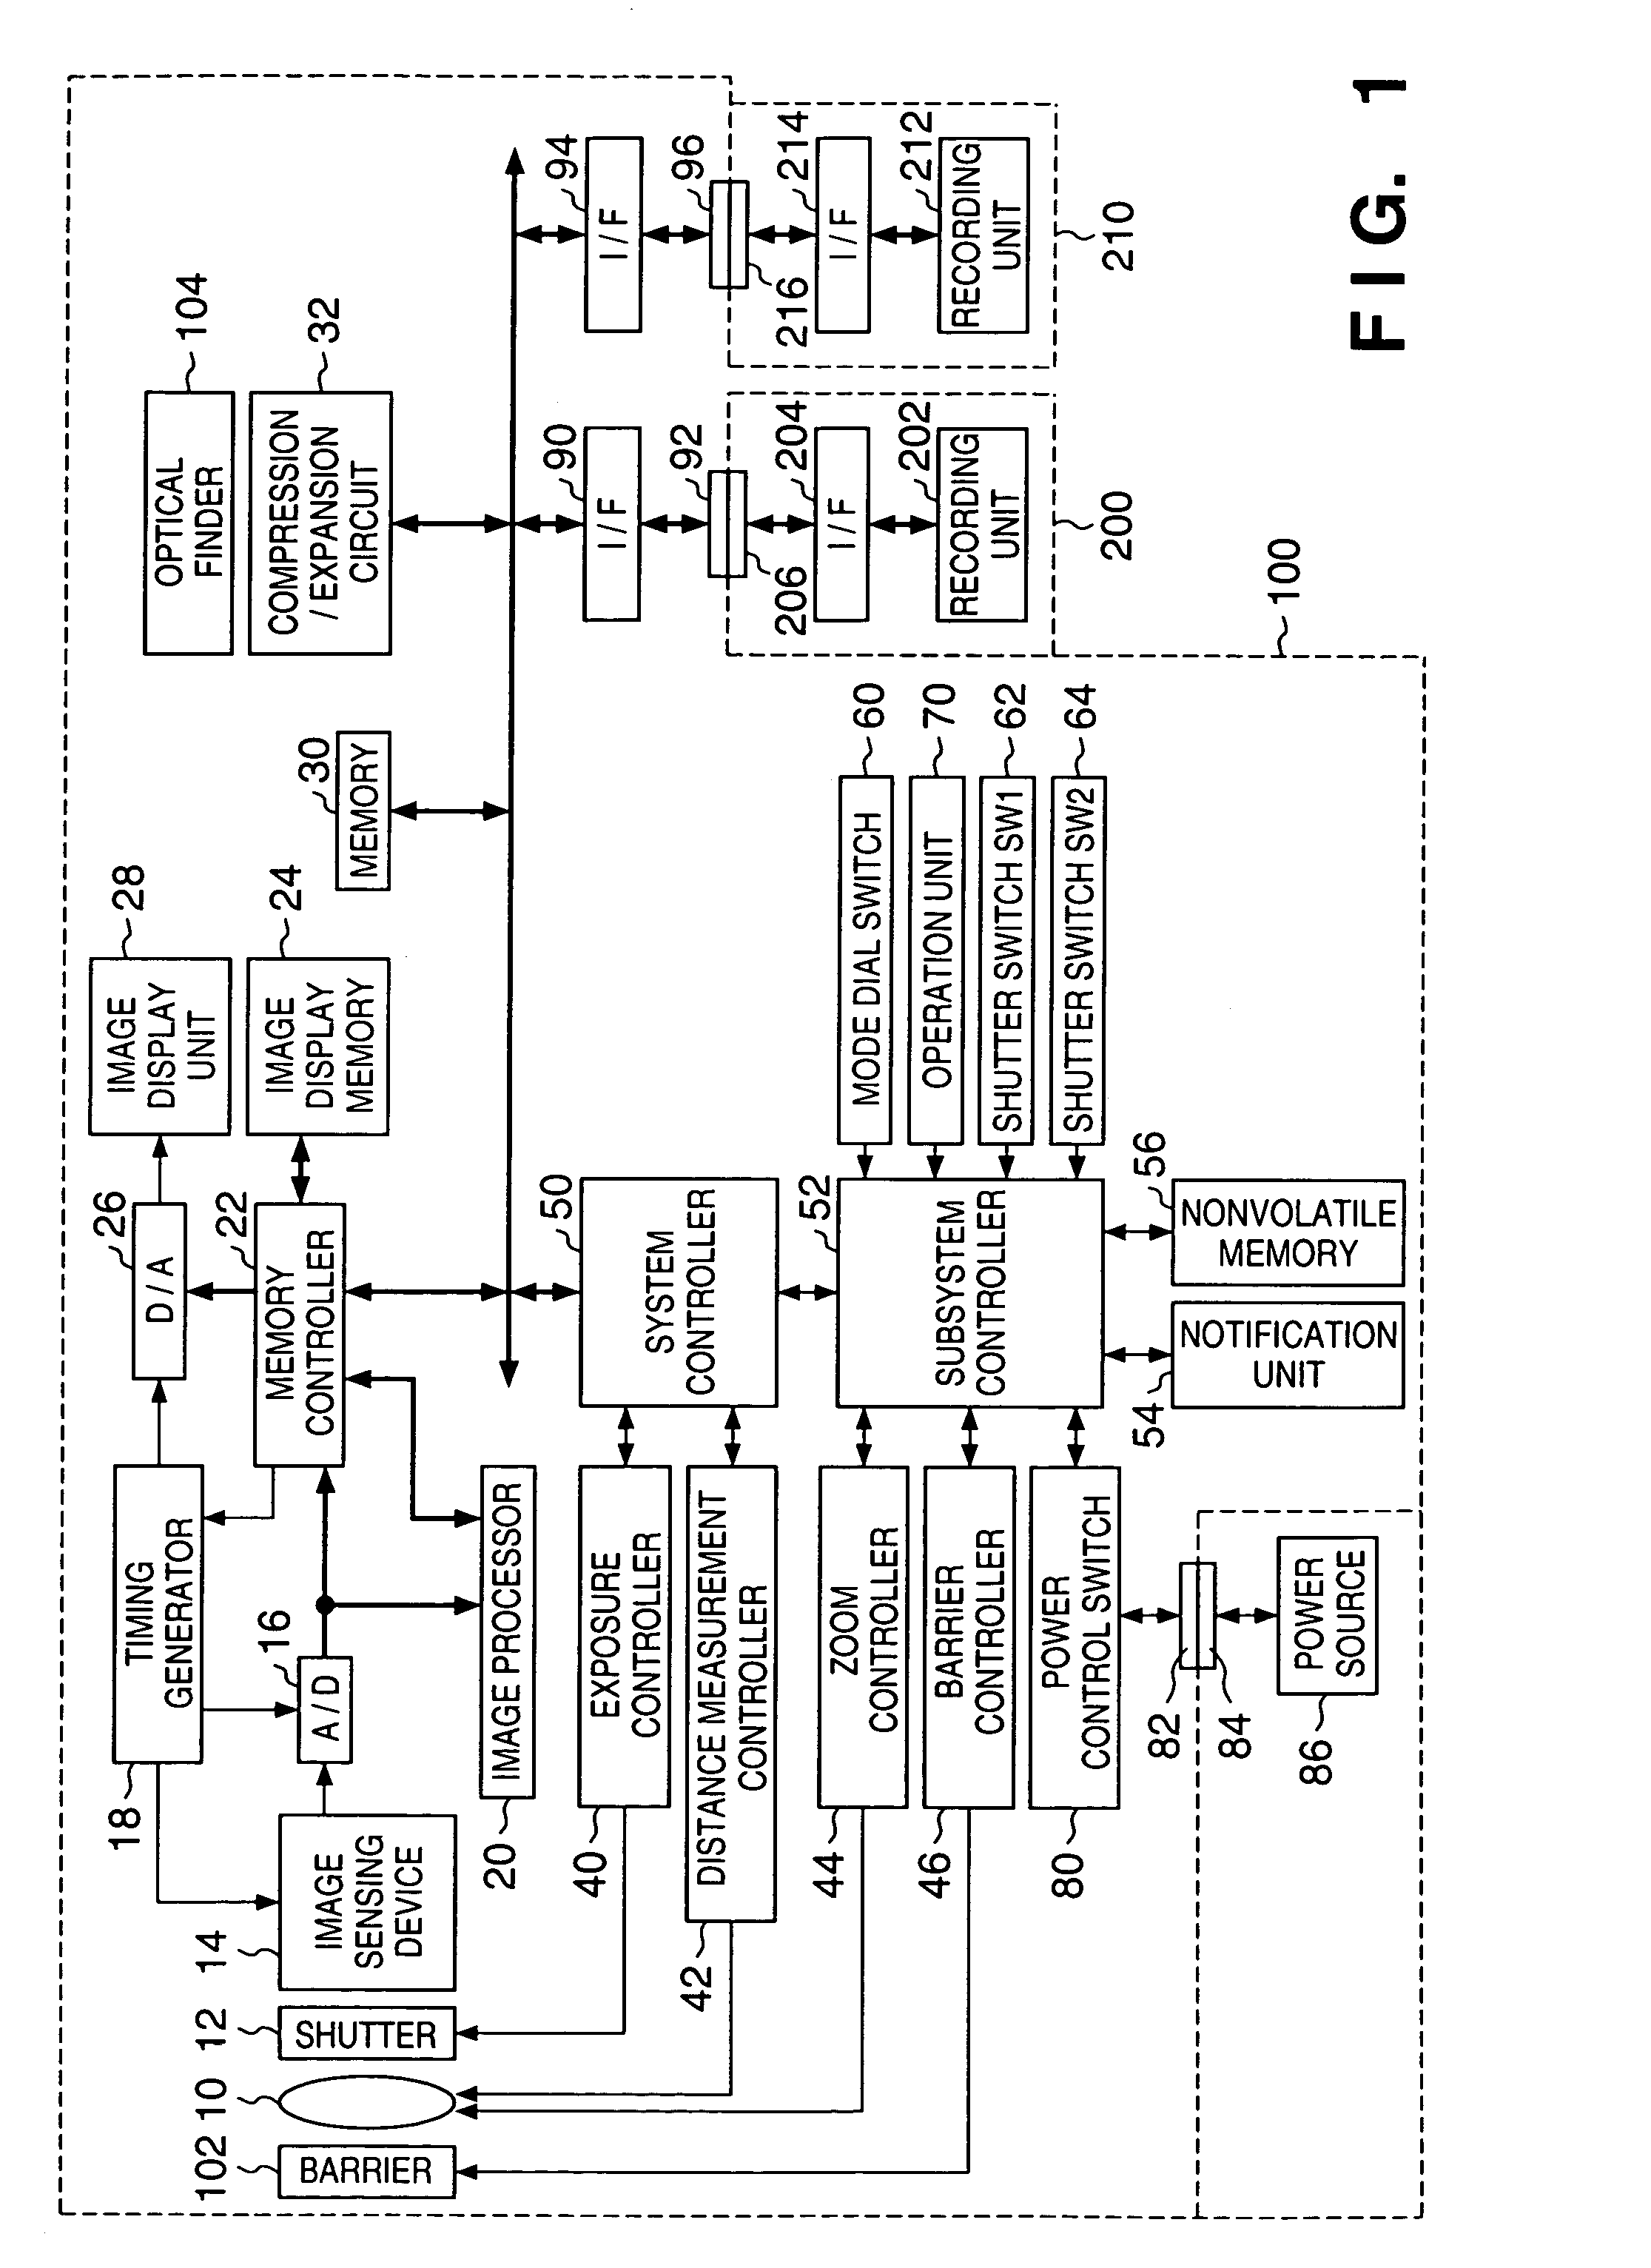 Electronic device using operating system for overall apparatus control including mechanical operation